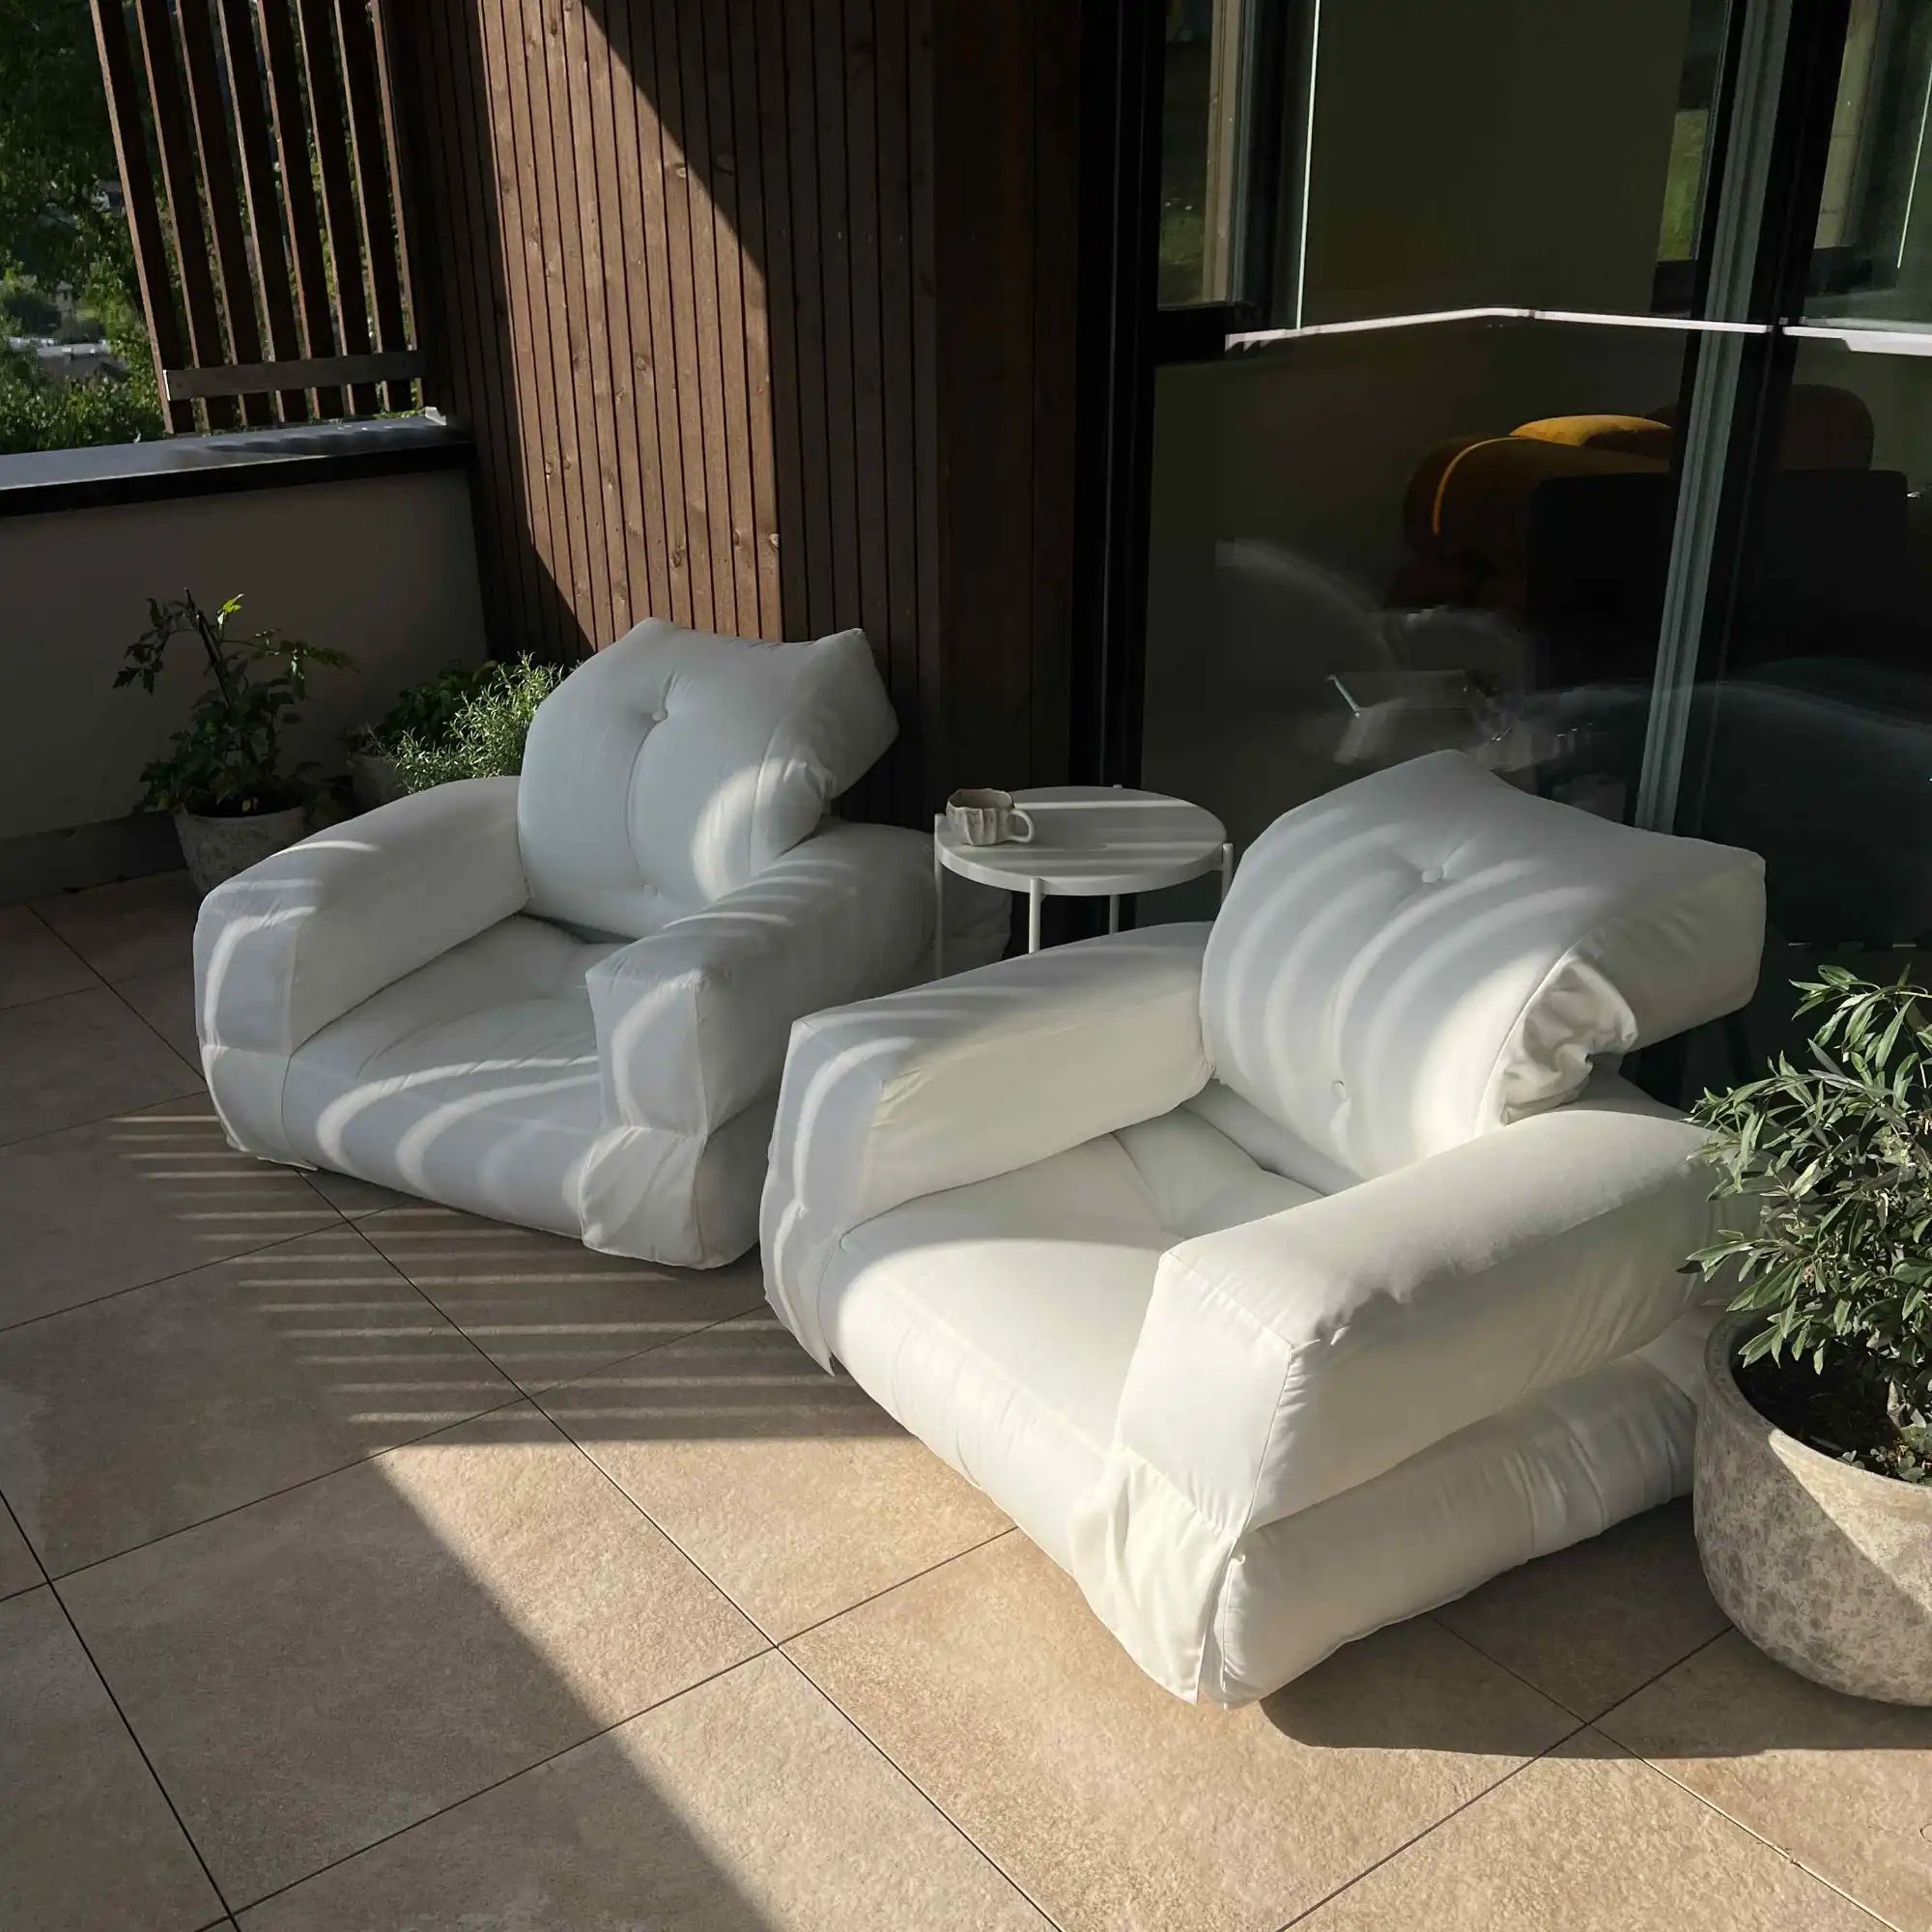 Outdoor Hippo Chair